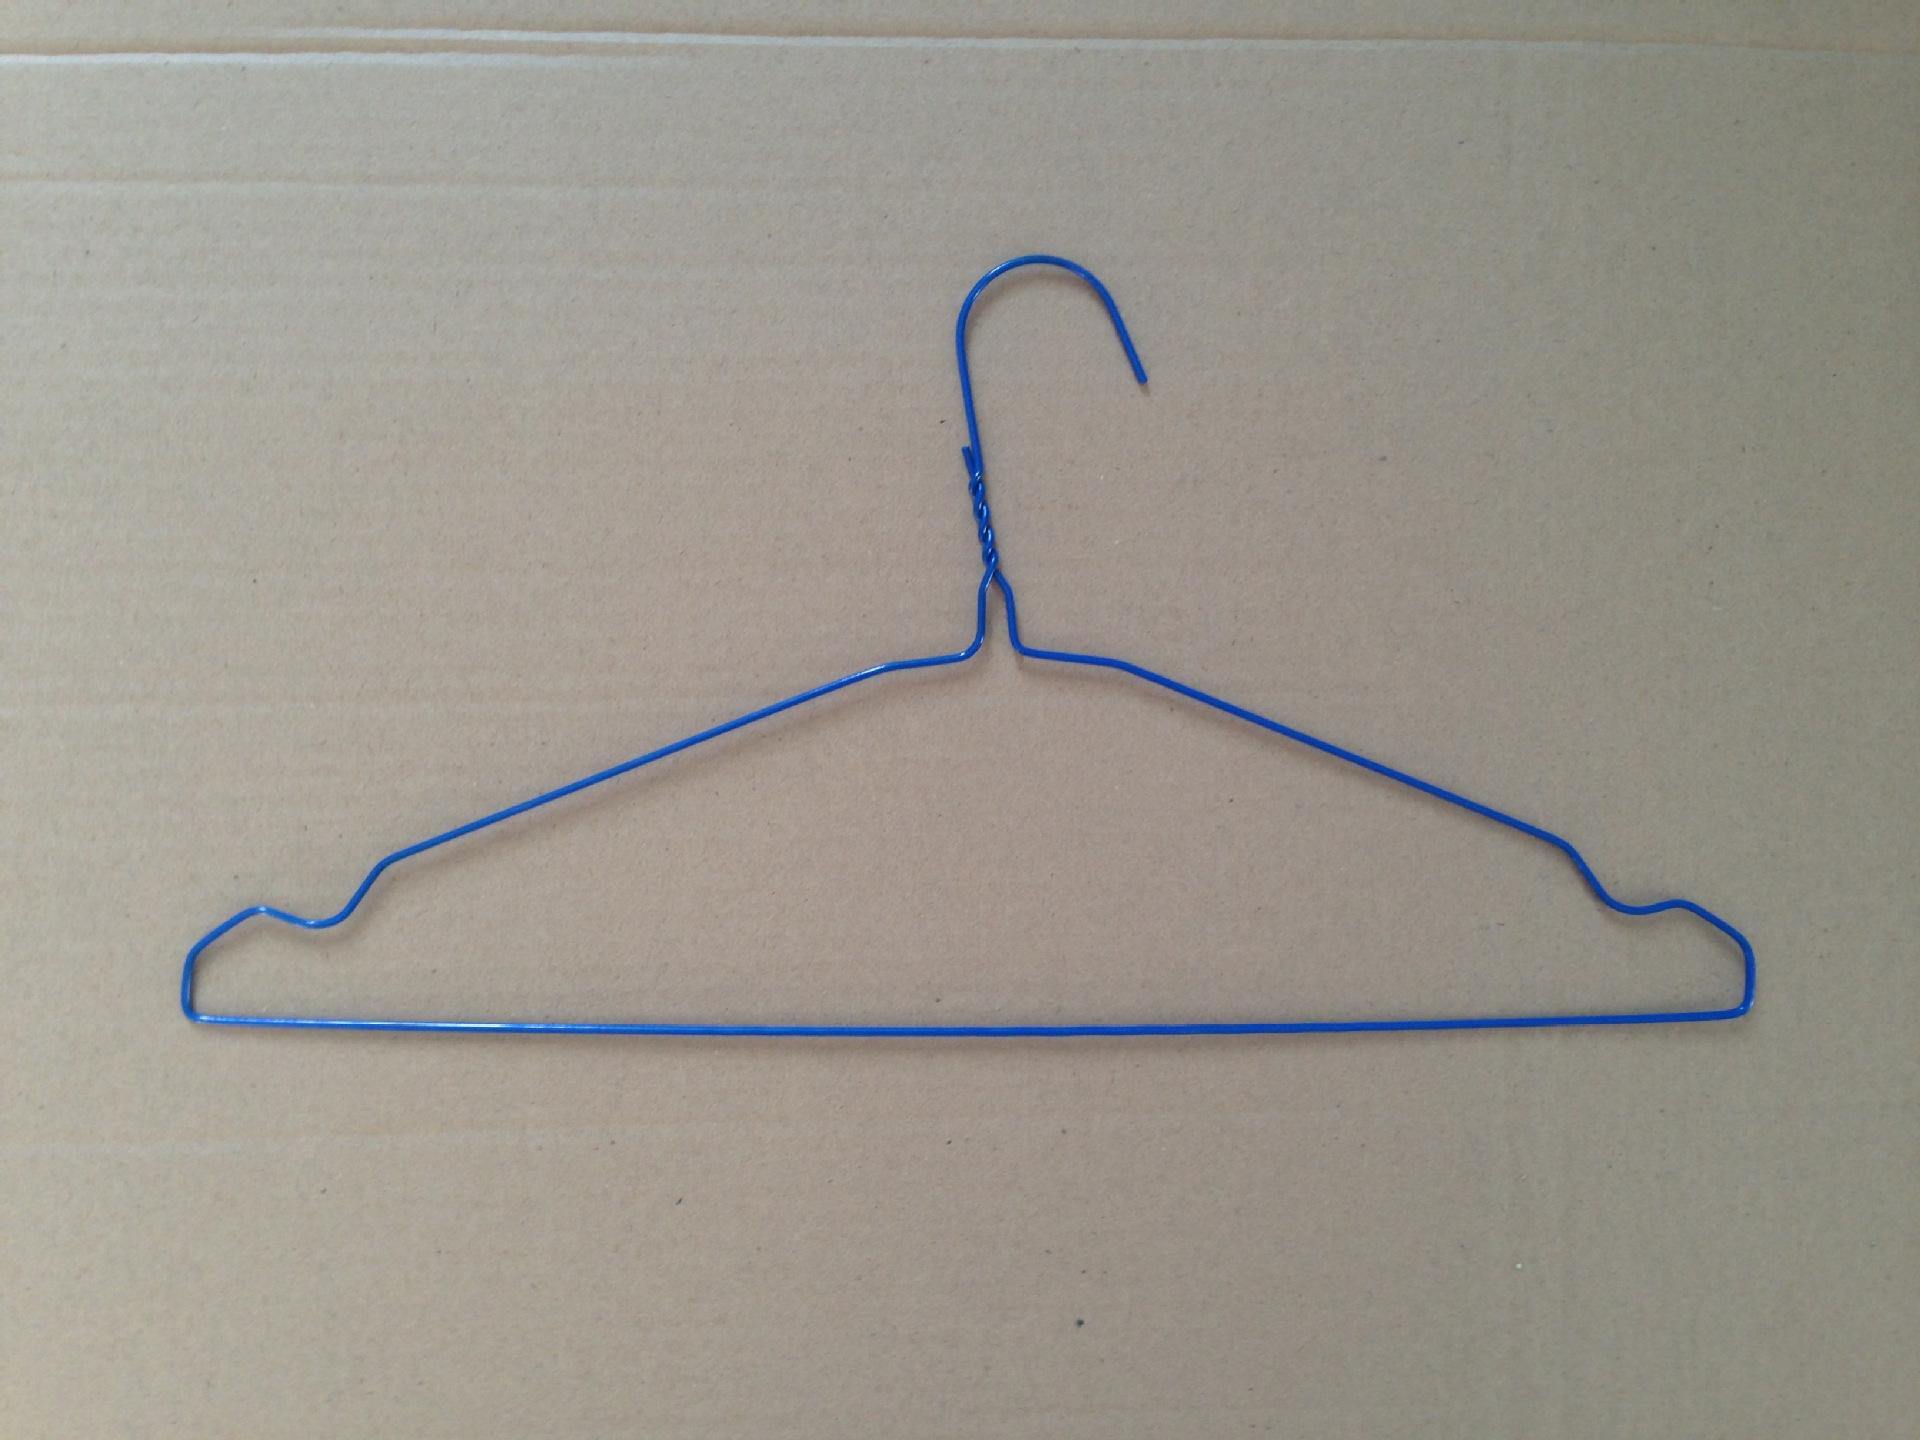 10 White Coated Wire Shirts Hanger; 18